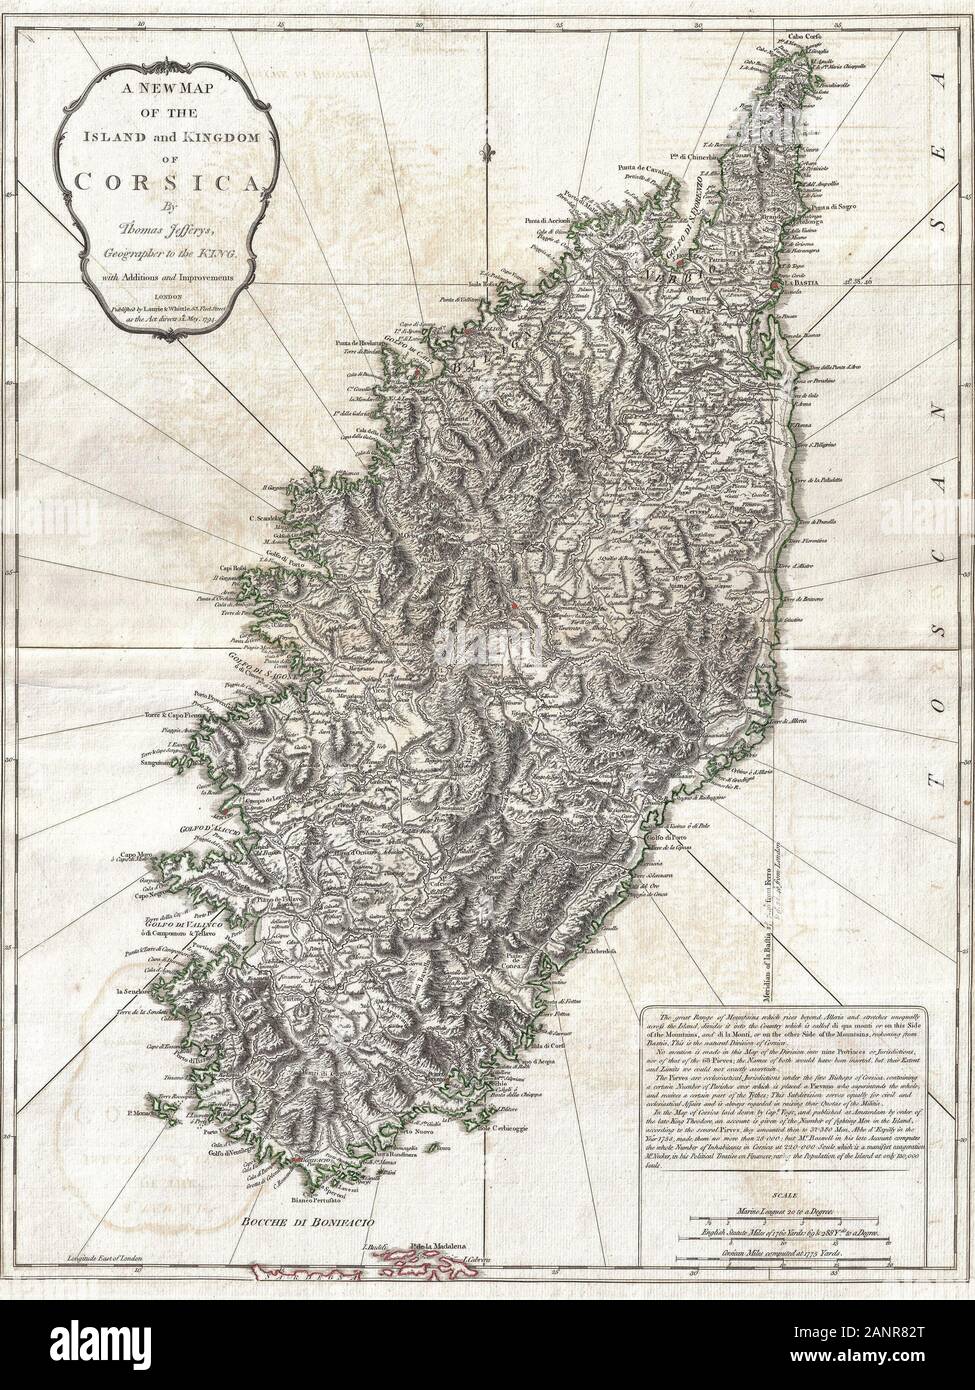 A New Map of the Island and Kingdom of Corsica. An extraordinary 1794 map of the Island and Kingdom of Corsica. Covers the entire island in extraordinary detail offering both topographical and political information. With its unique blend of dramatic mountains and stunning pristine beaches, Corsica is considered to be one of the world's most beautiful places. A note in the lower right hand quadrant discusses the geography and population of the island. Prepared by Thomas Jefferys and published by Laurie & Whittle in Kitchin's 1794 General Atlas Stock Photo